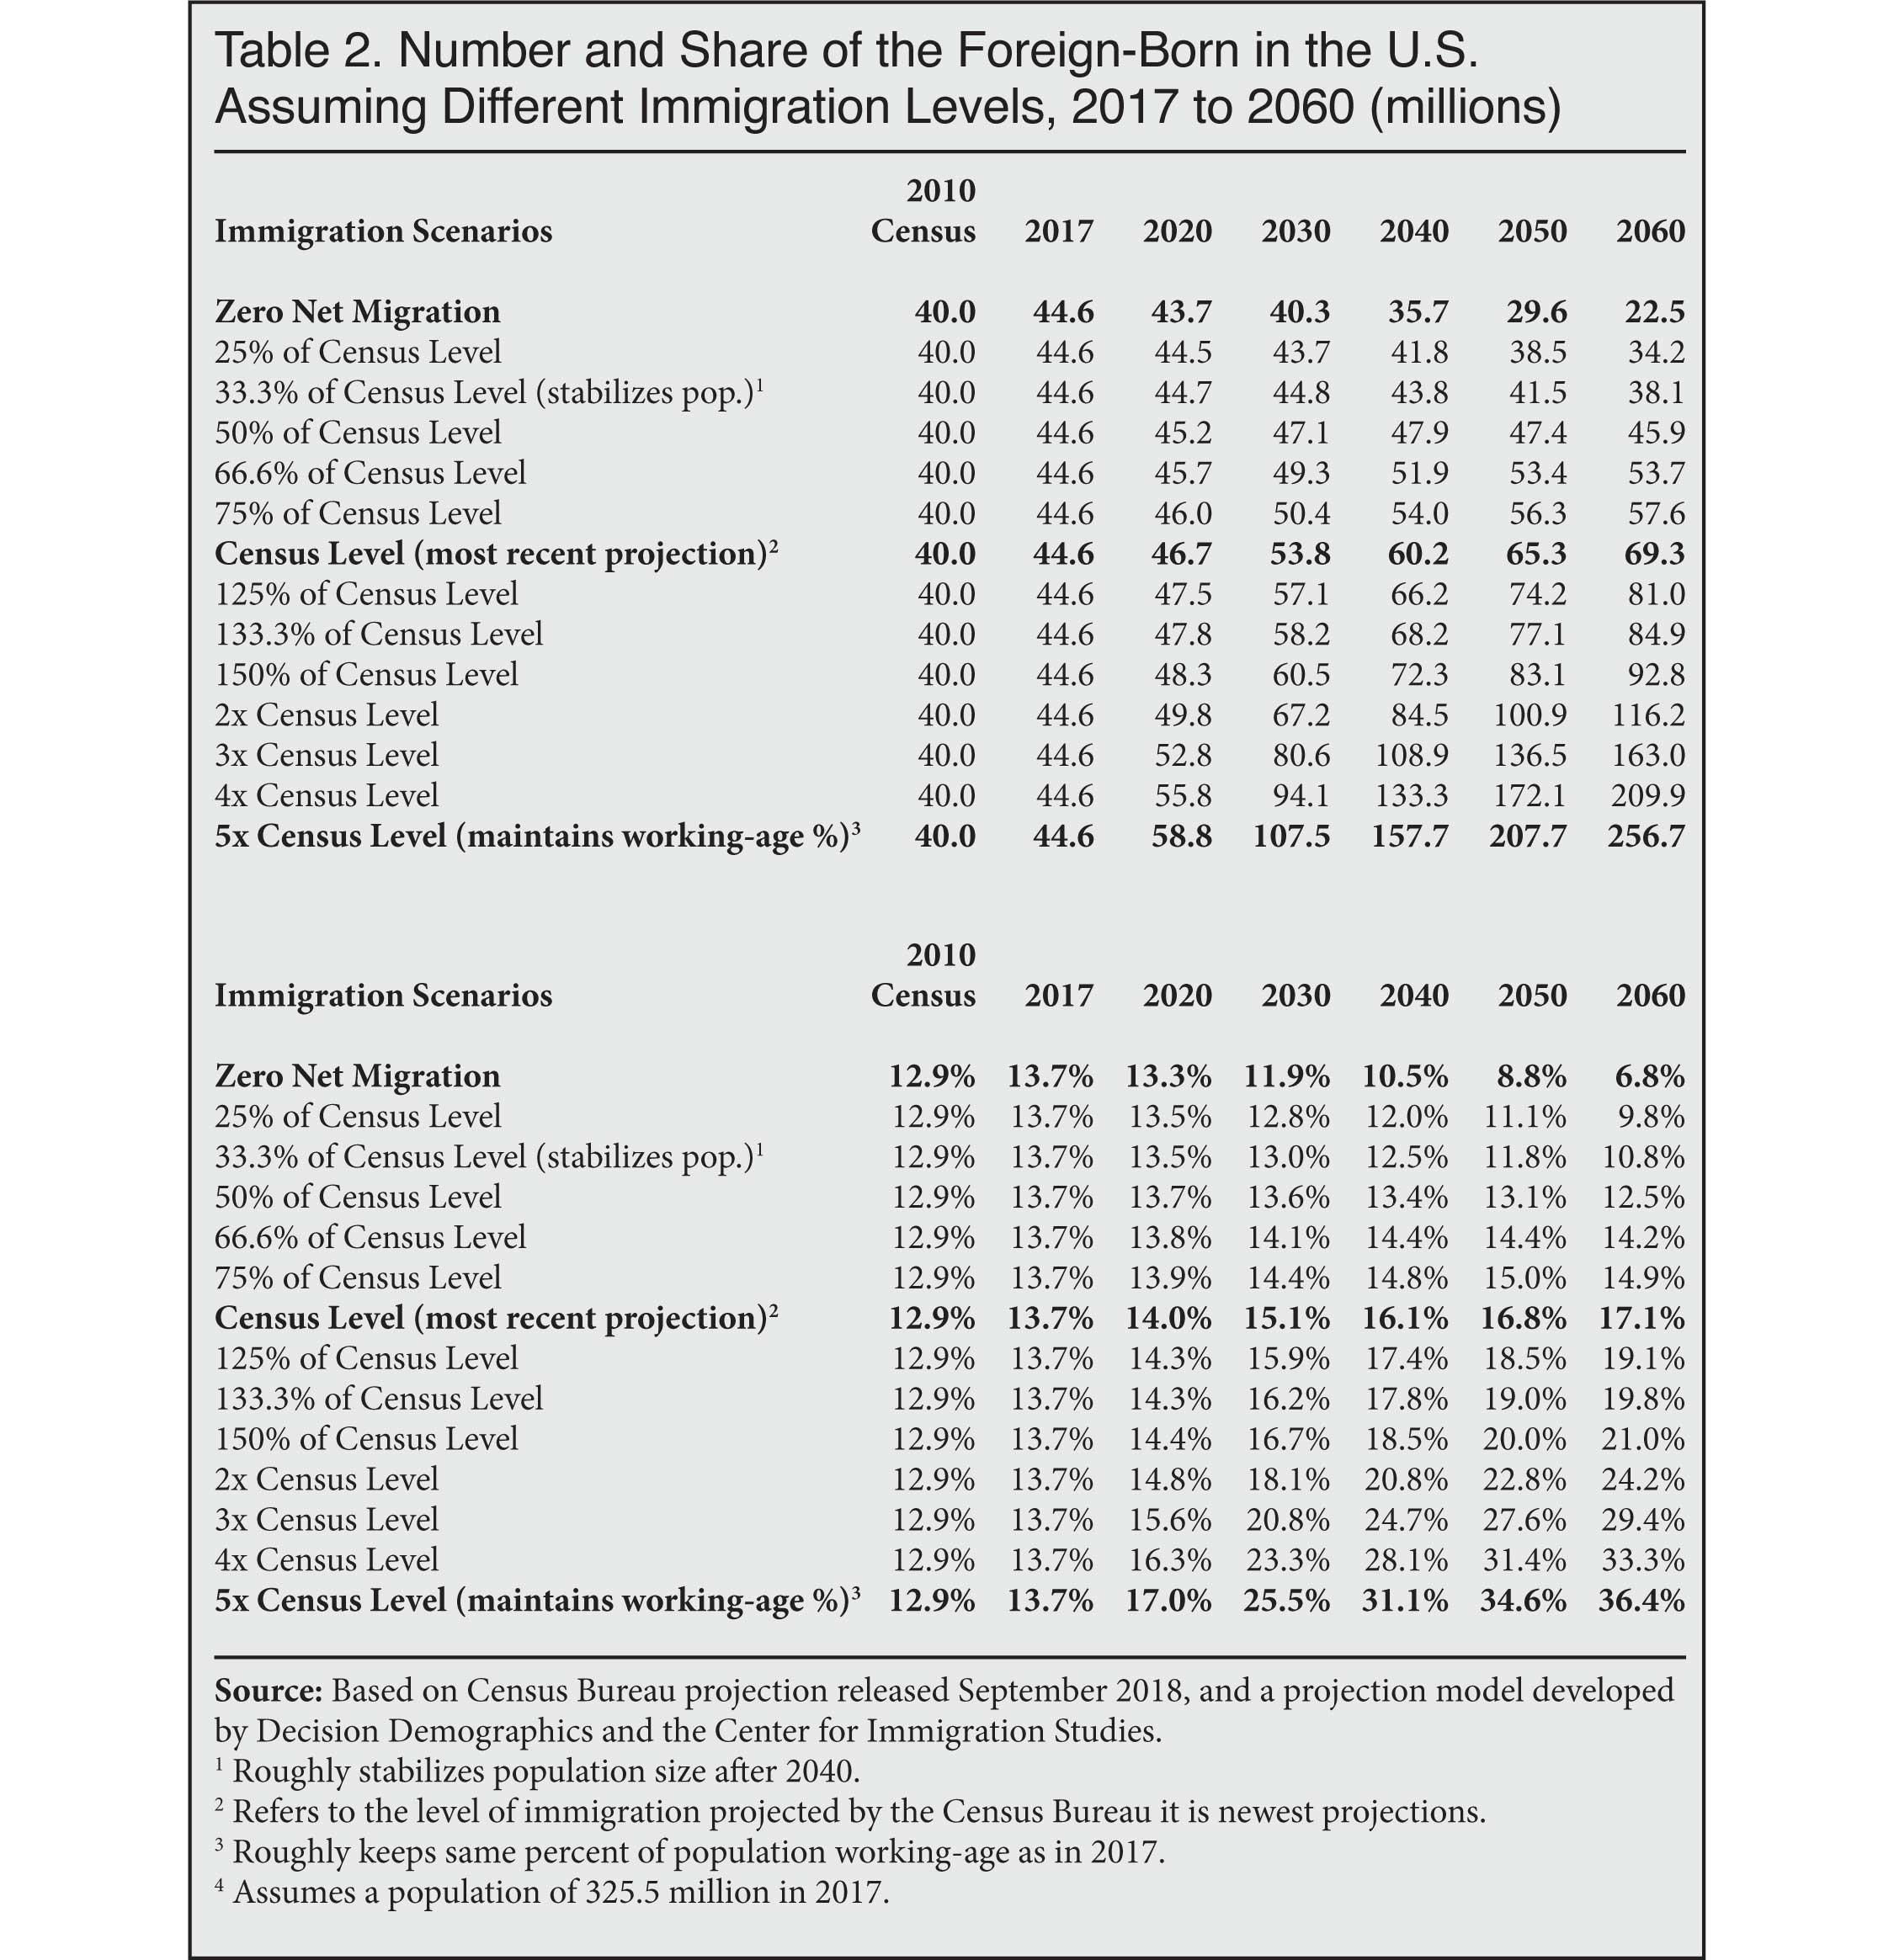 Table: Number and Share of the Foreign Born on the US Assuming Different Immigration Levels, 2017 to 2060